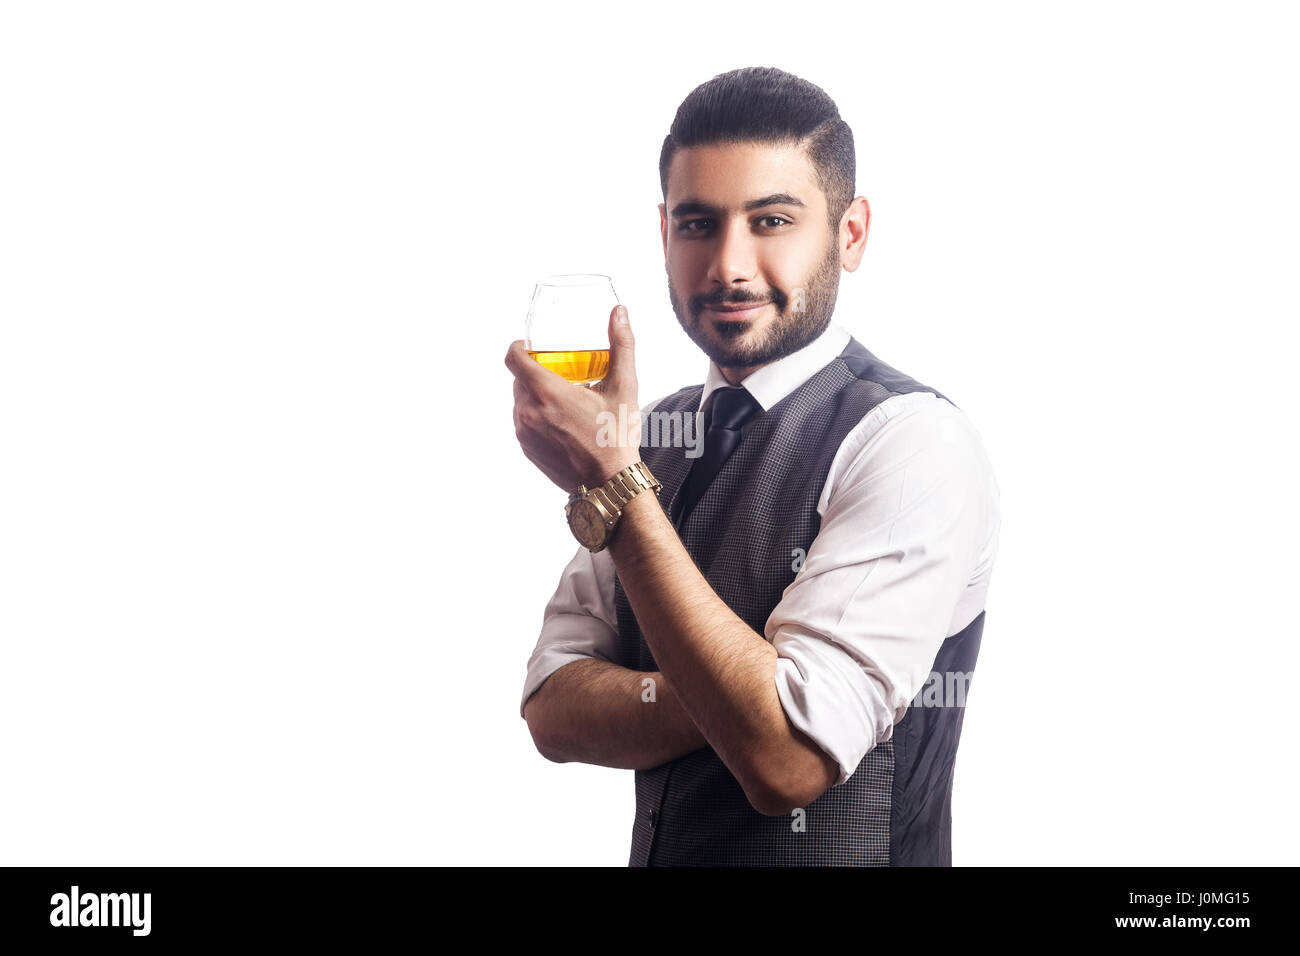 Beau bearded businessman holding a glass of whiskey. holding glass, smiling and looking at camera. studio shot, isolé sur fond blanc. Banque D'Images